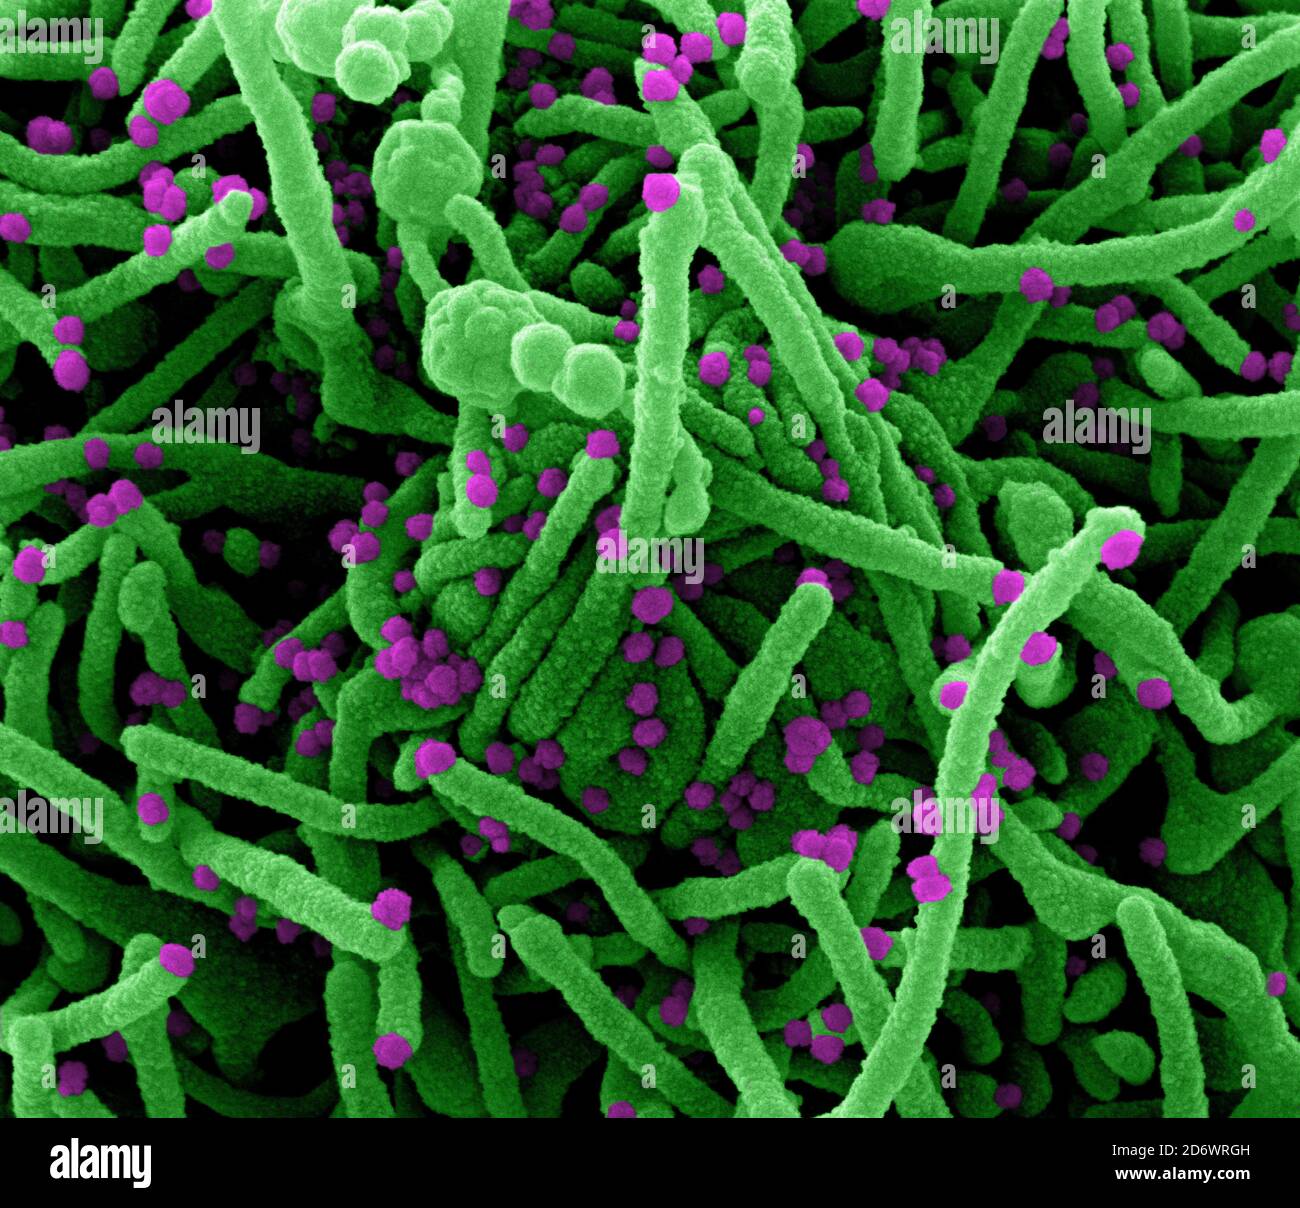 Colorized scanning electron micrograph of a cell (green) infected with SARS-COV-2 virus particles (purple), isolated from a patient sample. Image capt Stock Photo